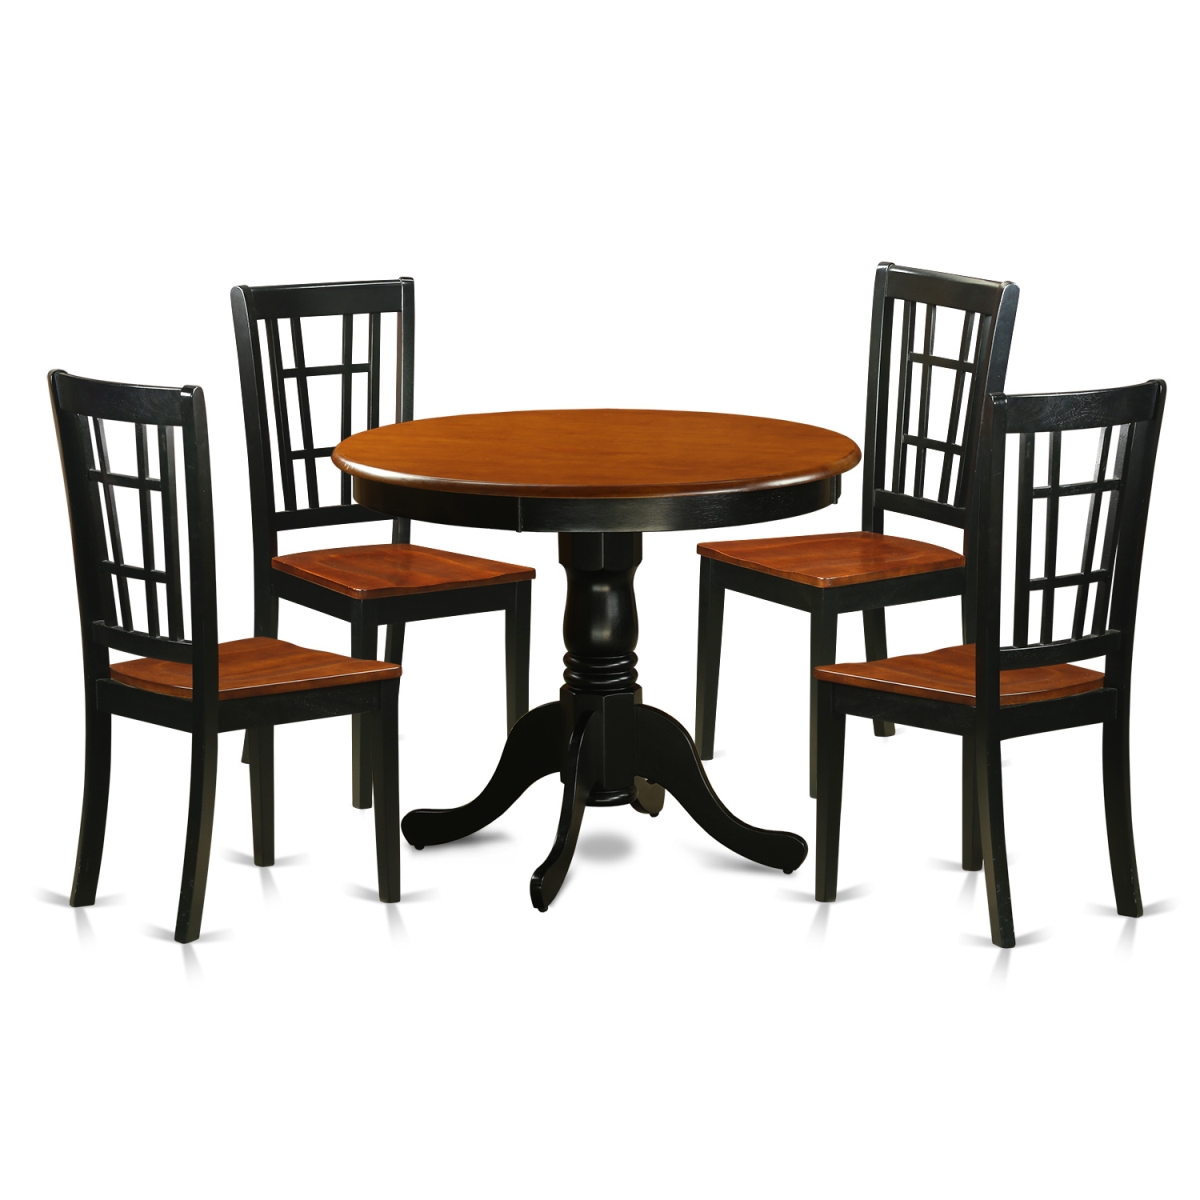 Picture of East West Furniture ANNI5-BLK-W Dining Table with 4 Wood Chairs, Black & Cherry - 5 Piece